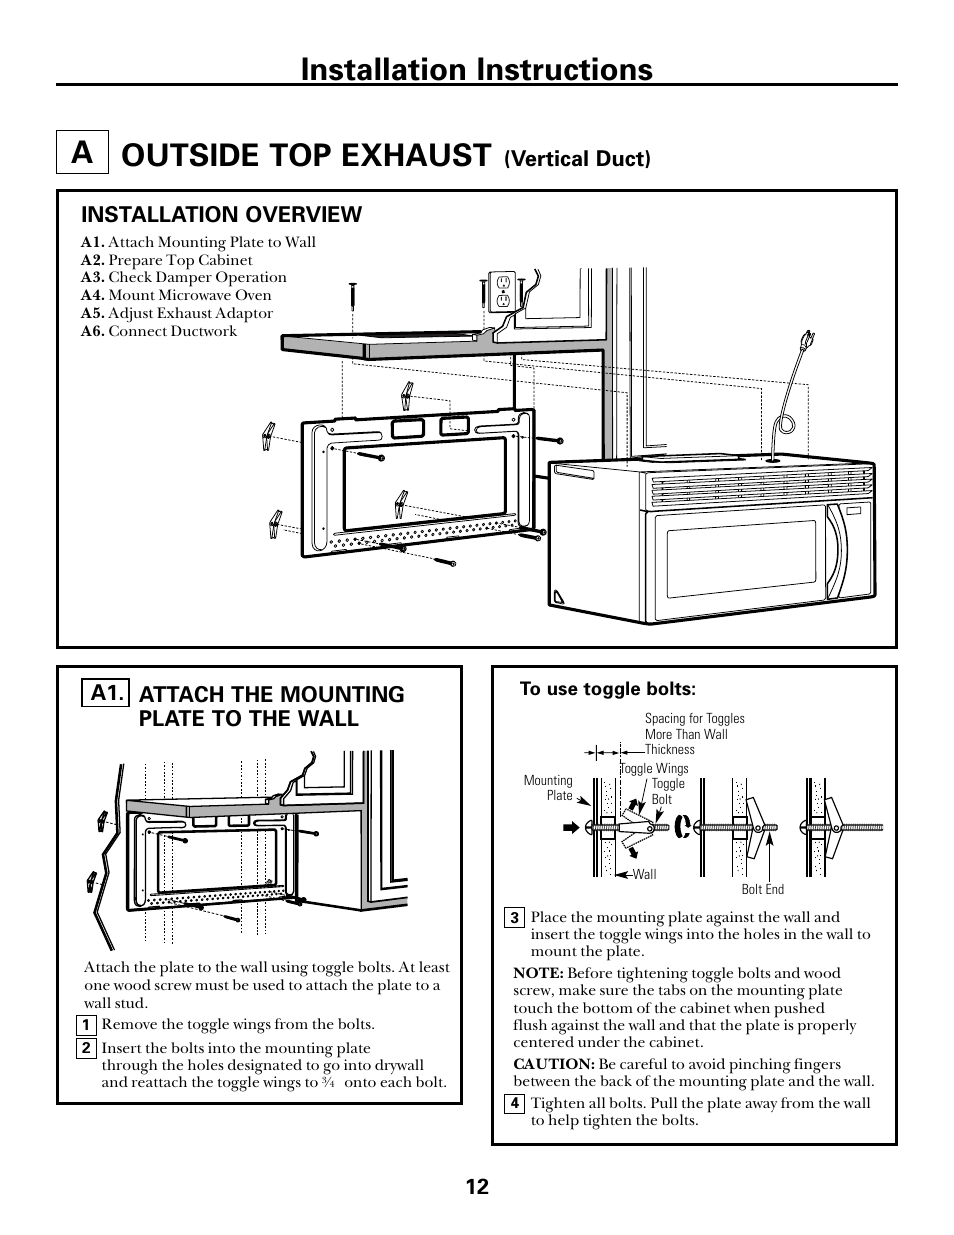 Outside top exhaust, Attach mounting plate to wall, Outside top exhaust –14 | Installation instructions, Attach the mounting plate to the wall a1. 12, Vertical duct), Installation overview | GE spacemaker xl1800 User Manual | Page 12 / 24